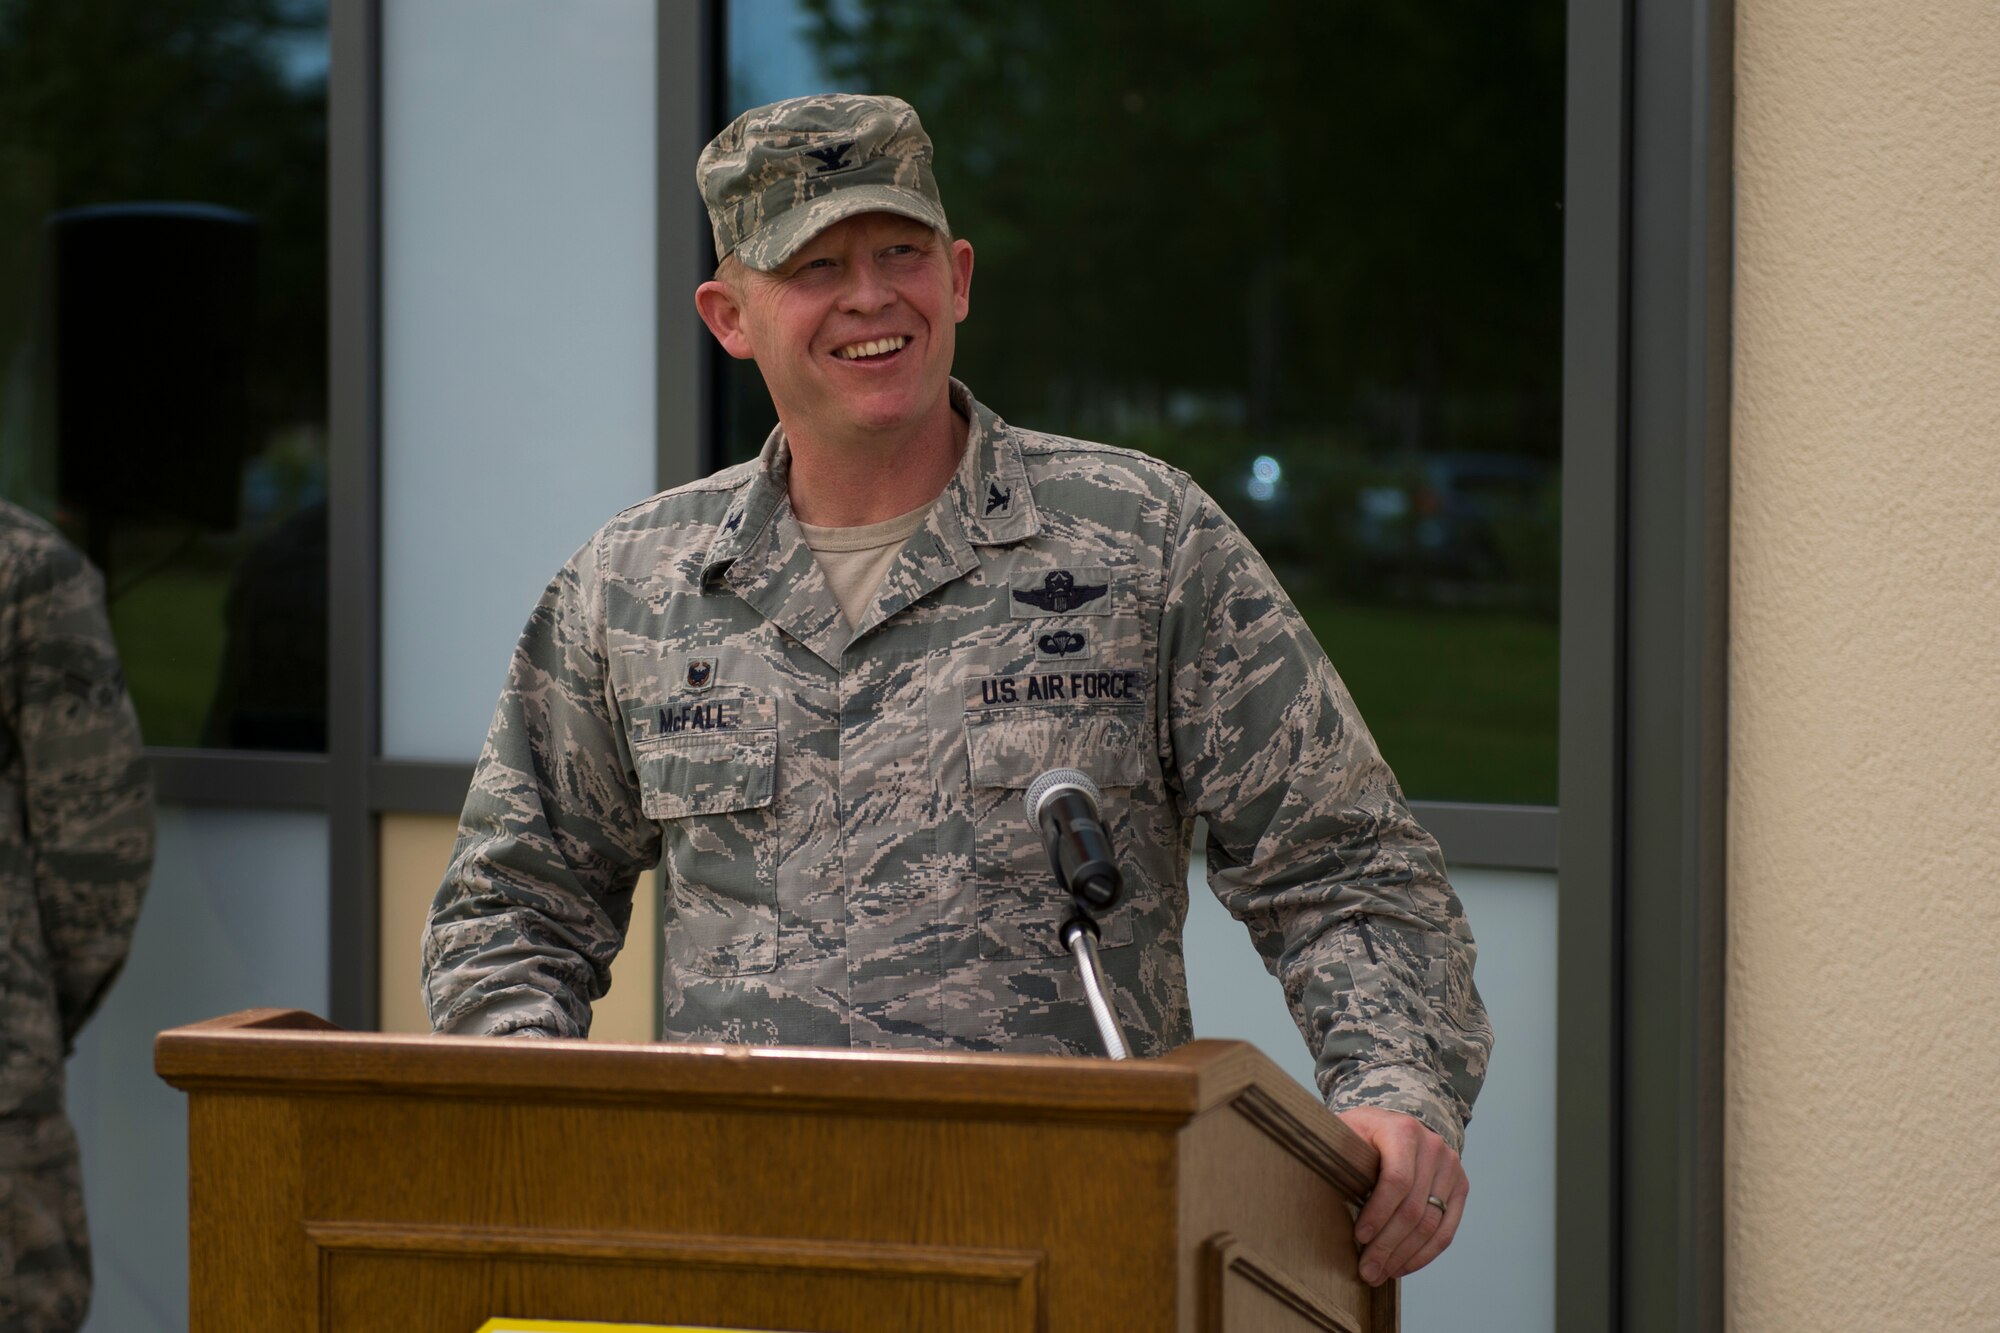 U.S. Air Force Col. Joe McFall, 52nd Fighter Wing commander, speaks during the official opening of the new child development center at Spangdahlem Air Base, Germany, May 11, 2015. McFall said the new facility is an important addition to the base and enhances quality of life for Saber families. (U.S. Air Force photo by Airman 1st Class Luke Kitterman/Released)